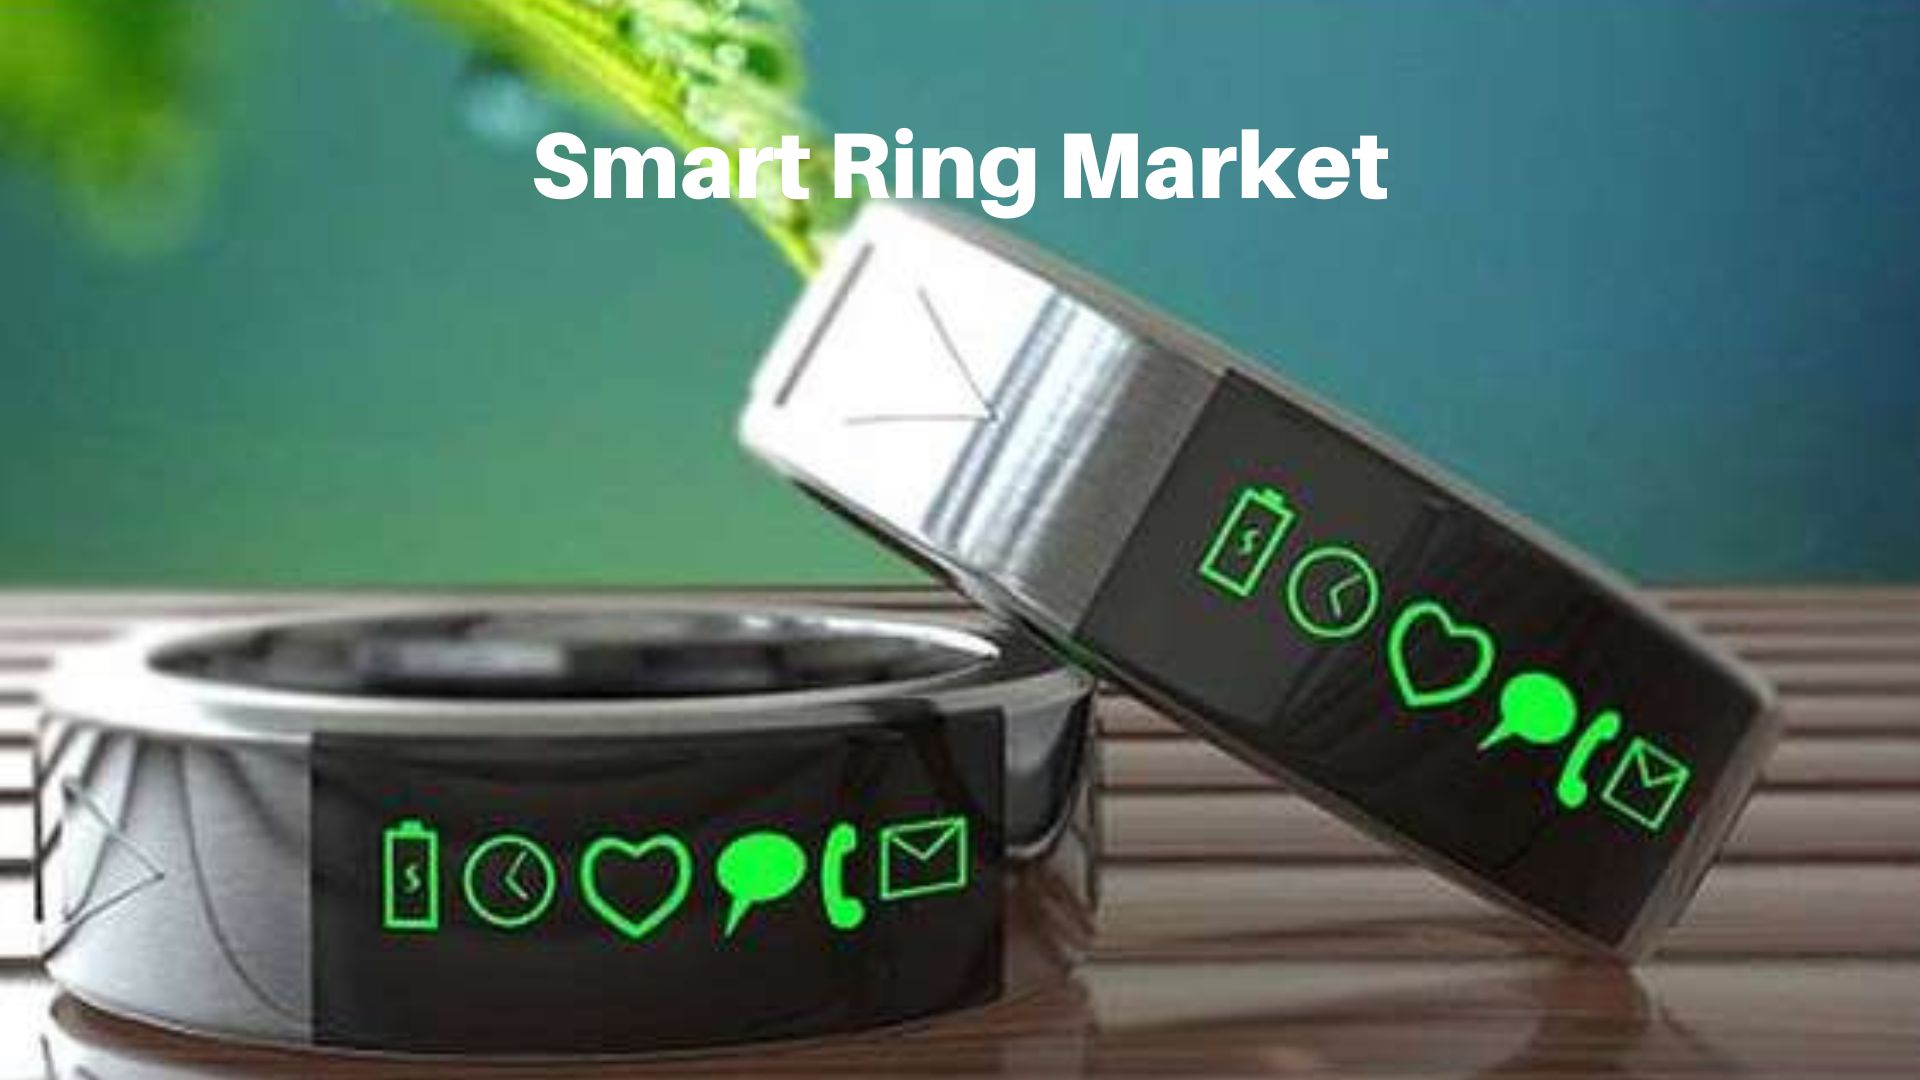 The global smart ring market is estimated to be worth US$34.87 billion by 2032, at a CAGR of 29.3%